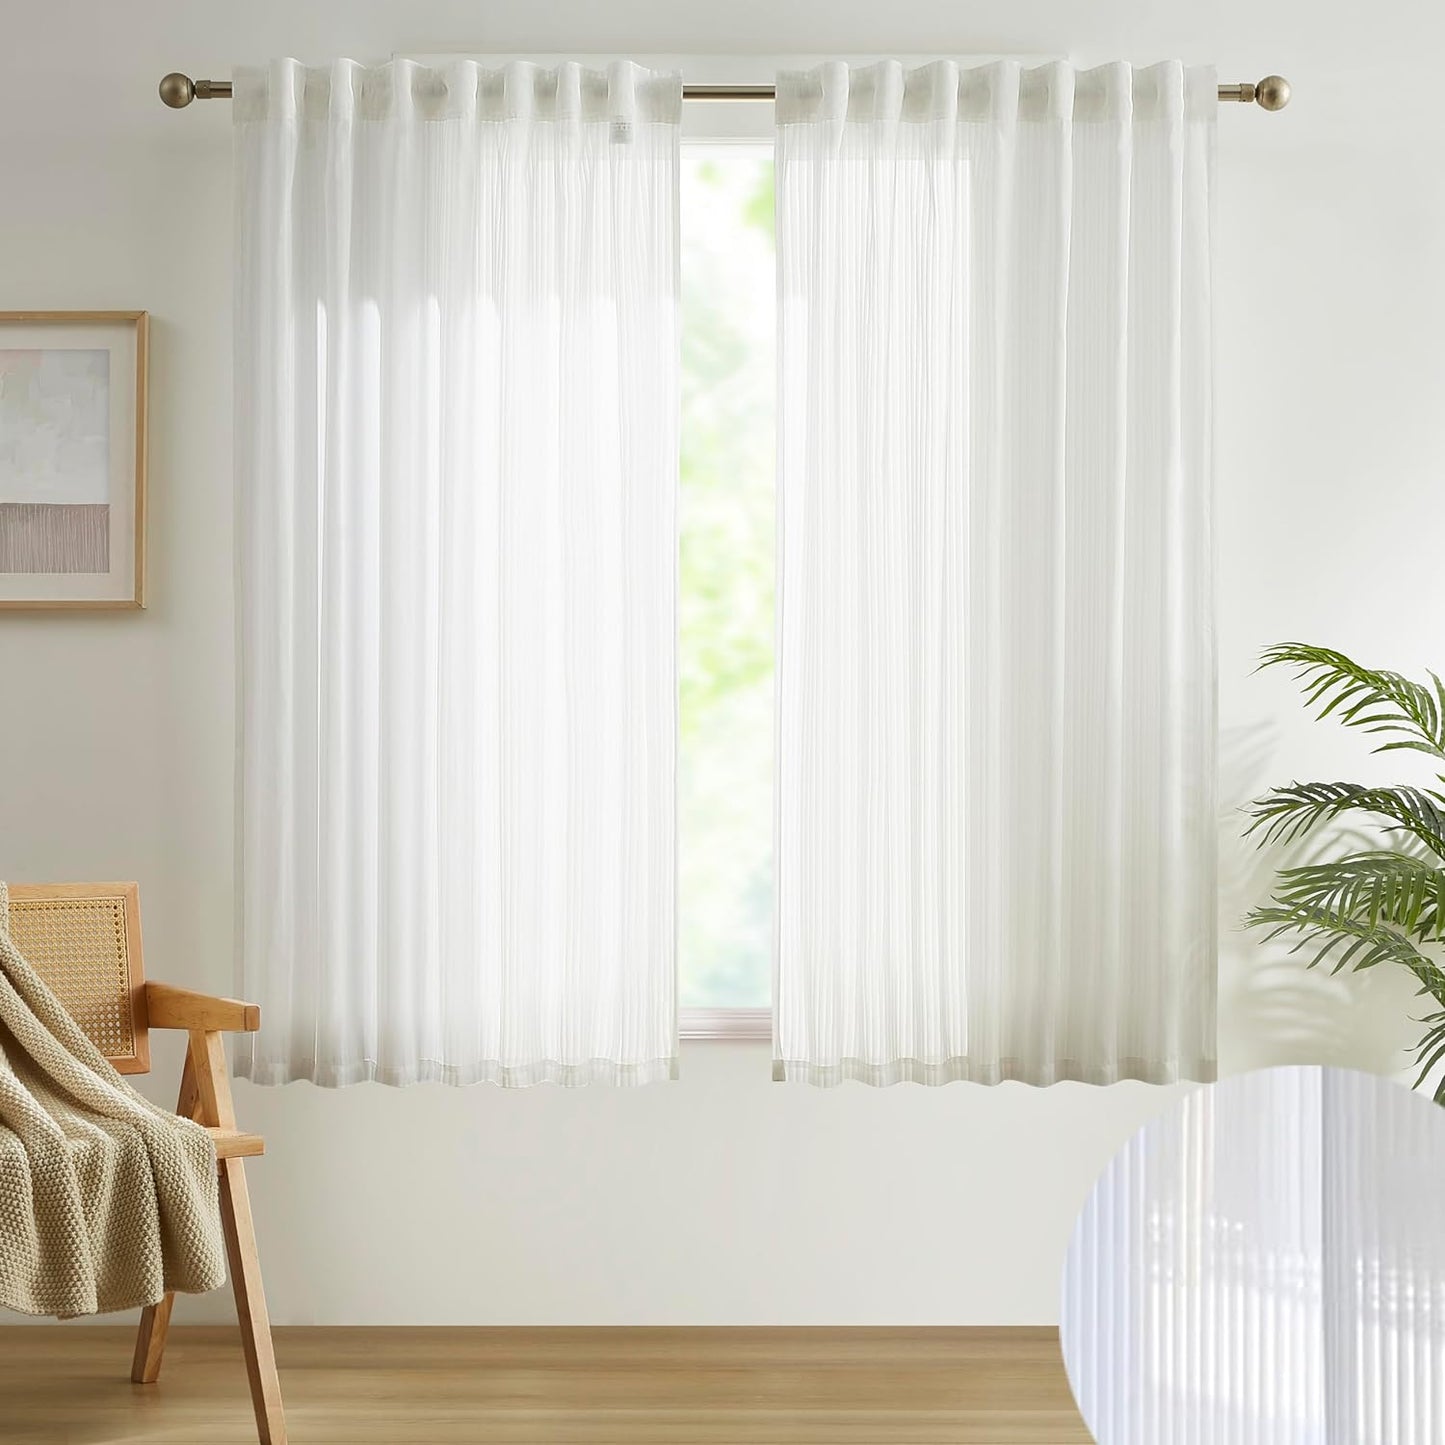 Beauoop Striped Sheer Window Curtain Panels for Living Room Bedroom 108 Inch Long Light Filtering Sheer Voile Drapes Chiffon Back Tab Rod Pocket Pleat Taped Window Treatment Set, 2 Panels, 52"W, White  Beauoop White 52"X63"X2 